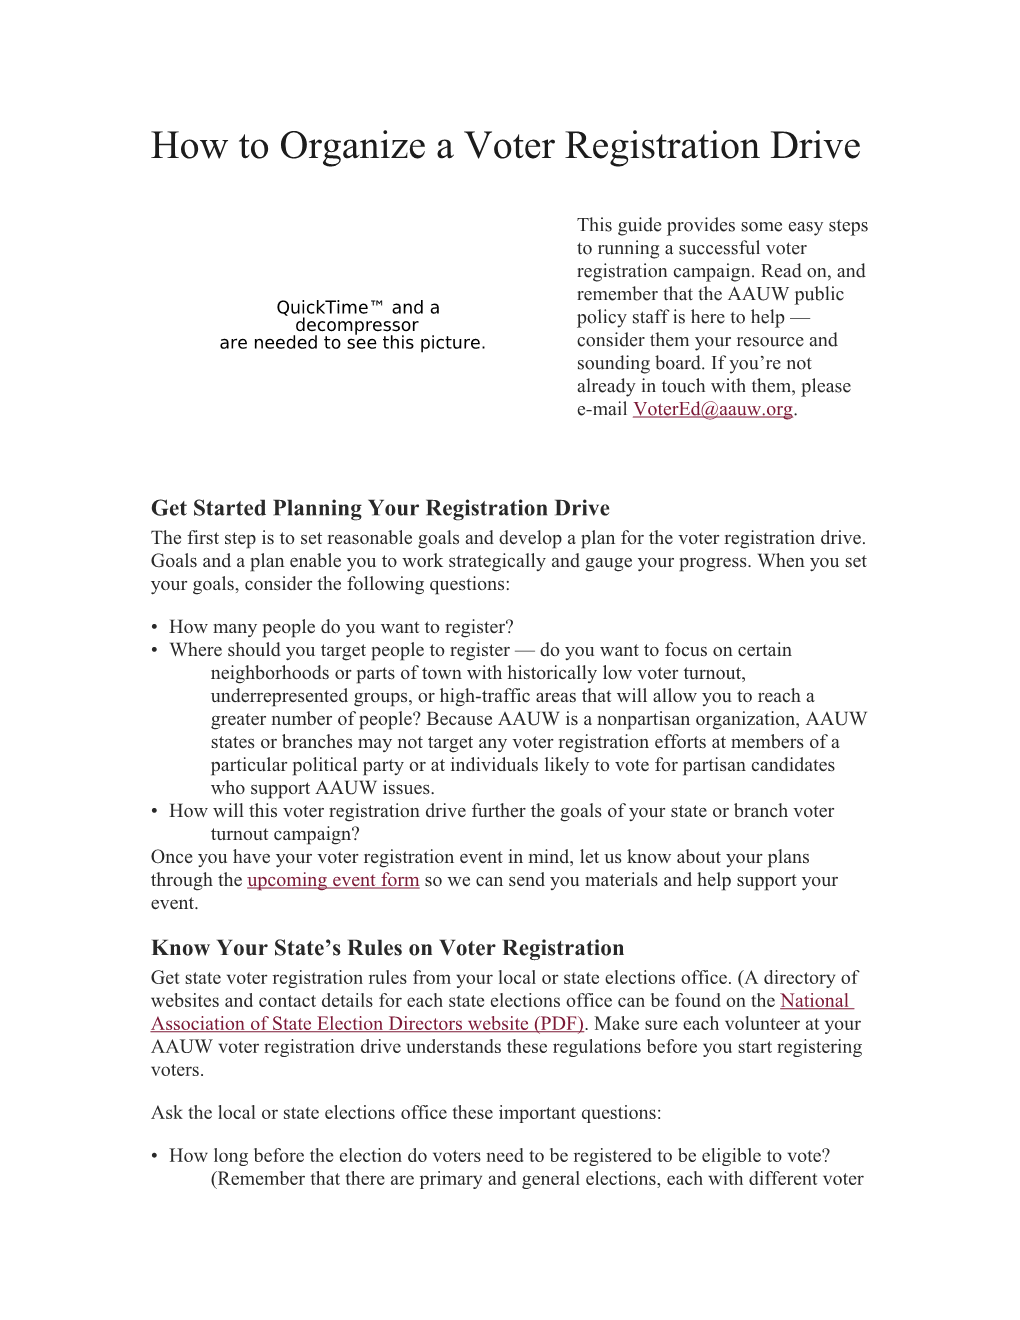 How to Organize a Voter Registration Drive